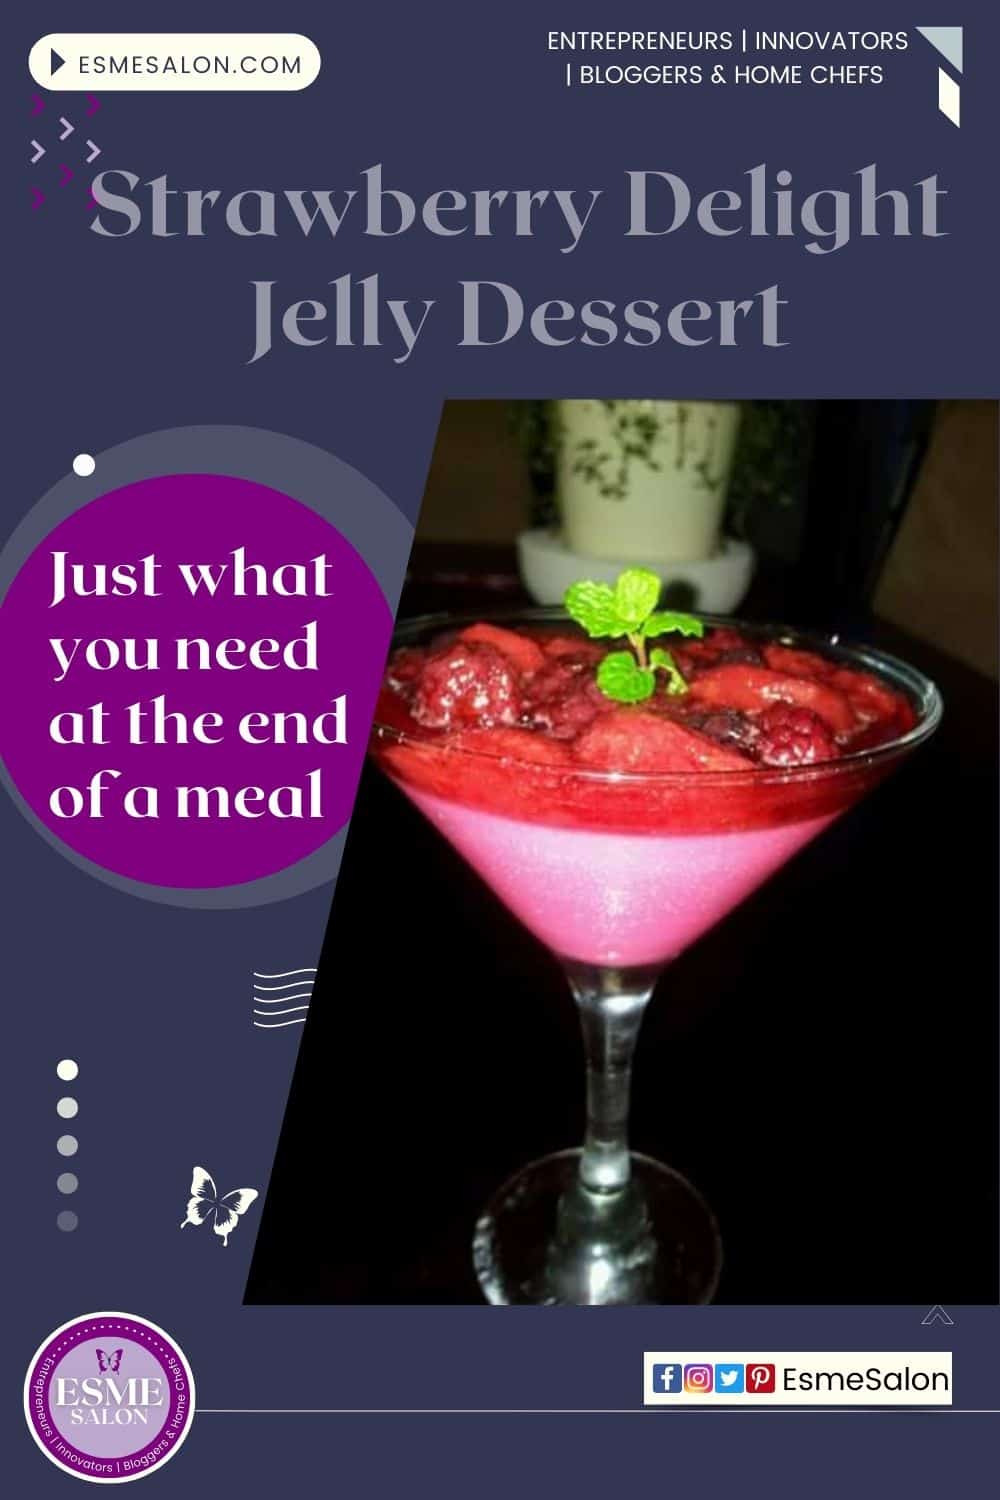 an image of 3 stemmed glassed with Strawberry Delight Jelly Dessert